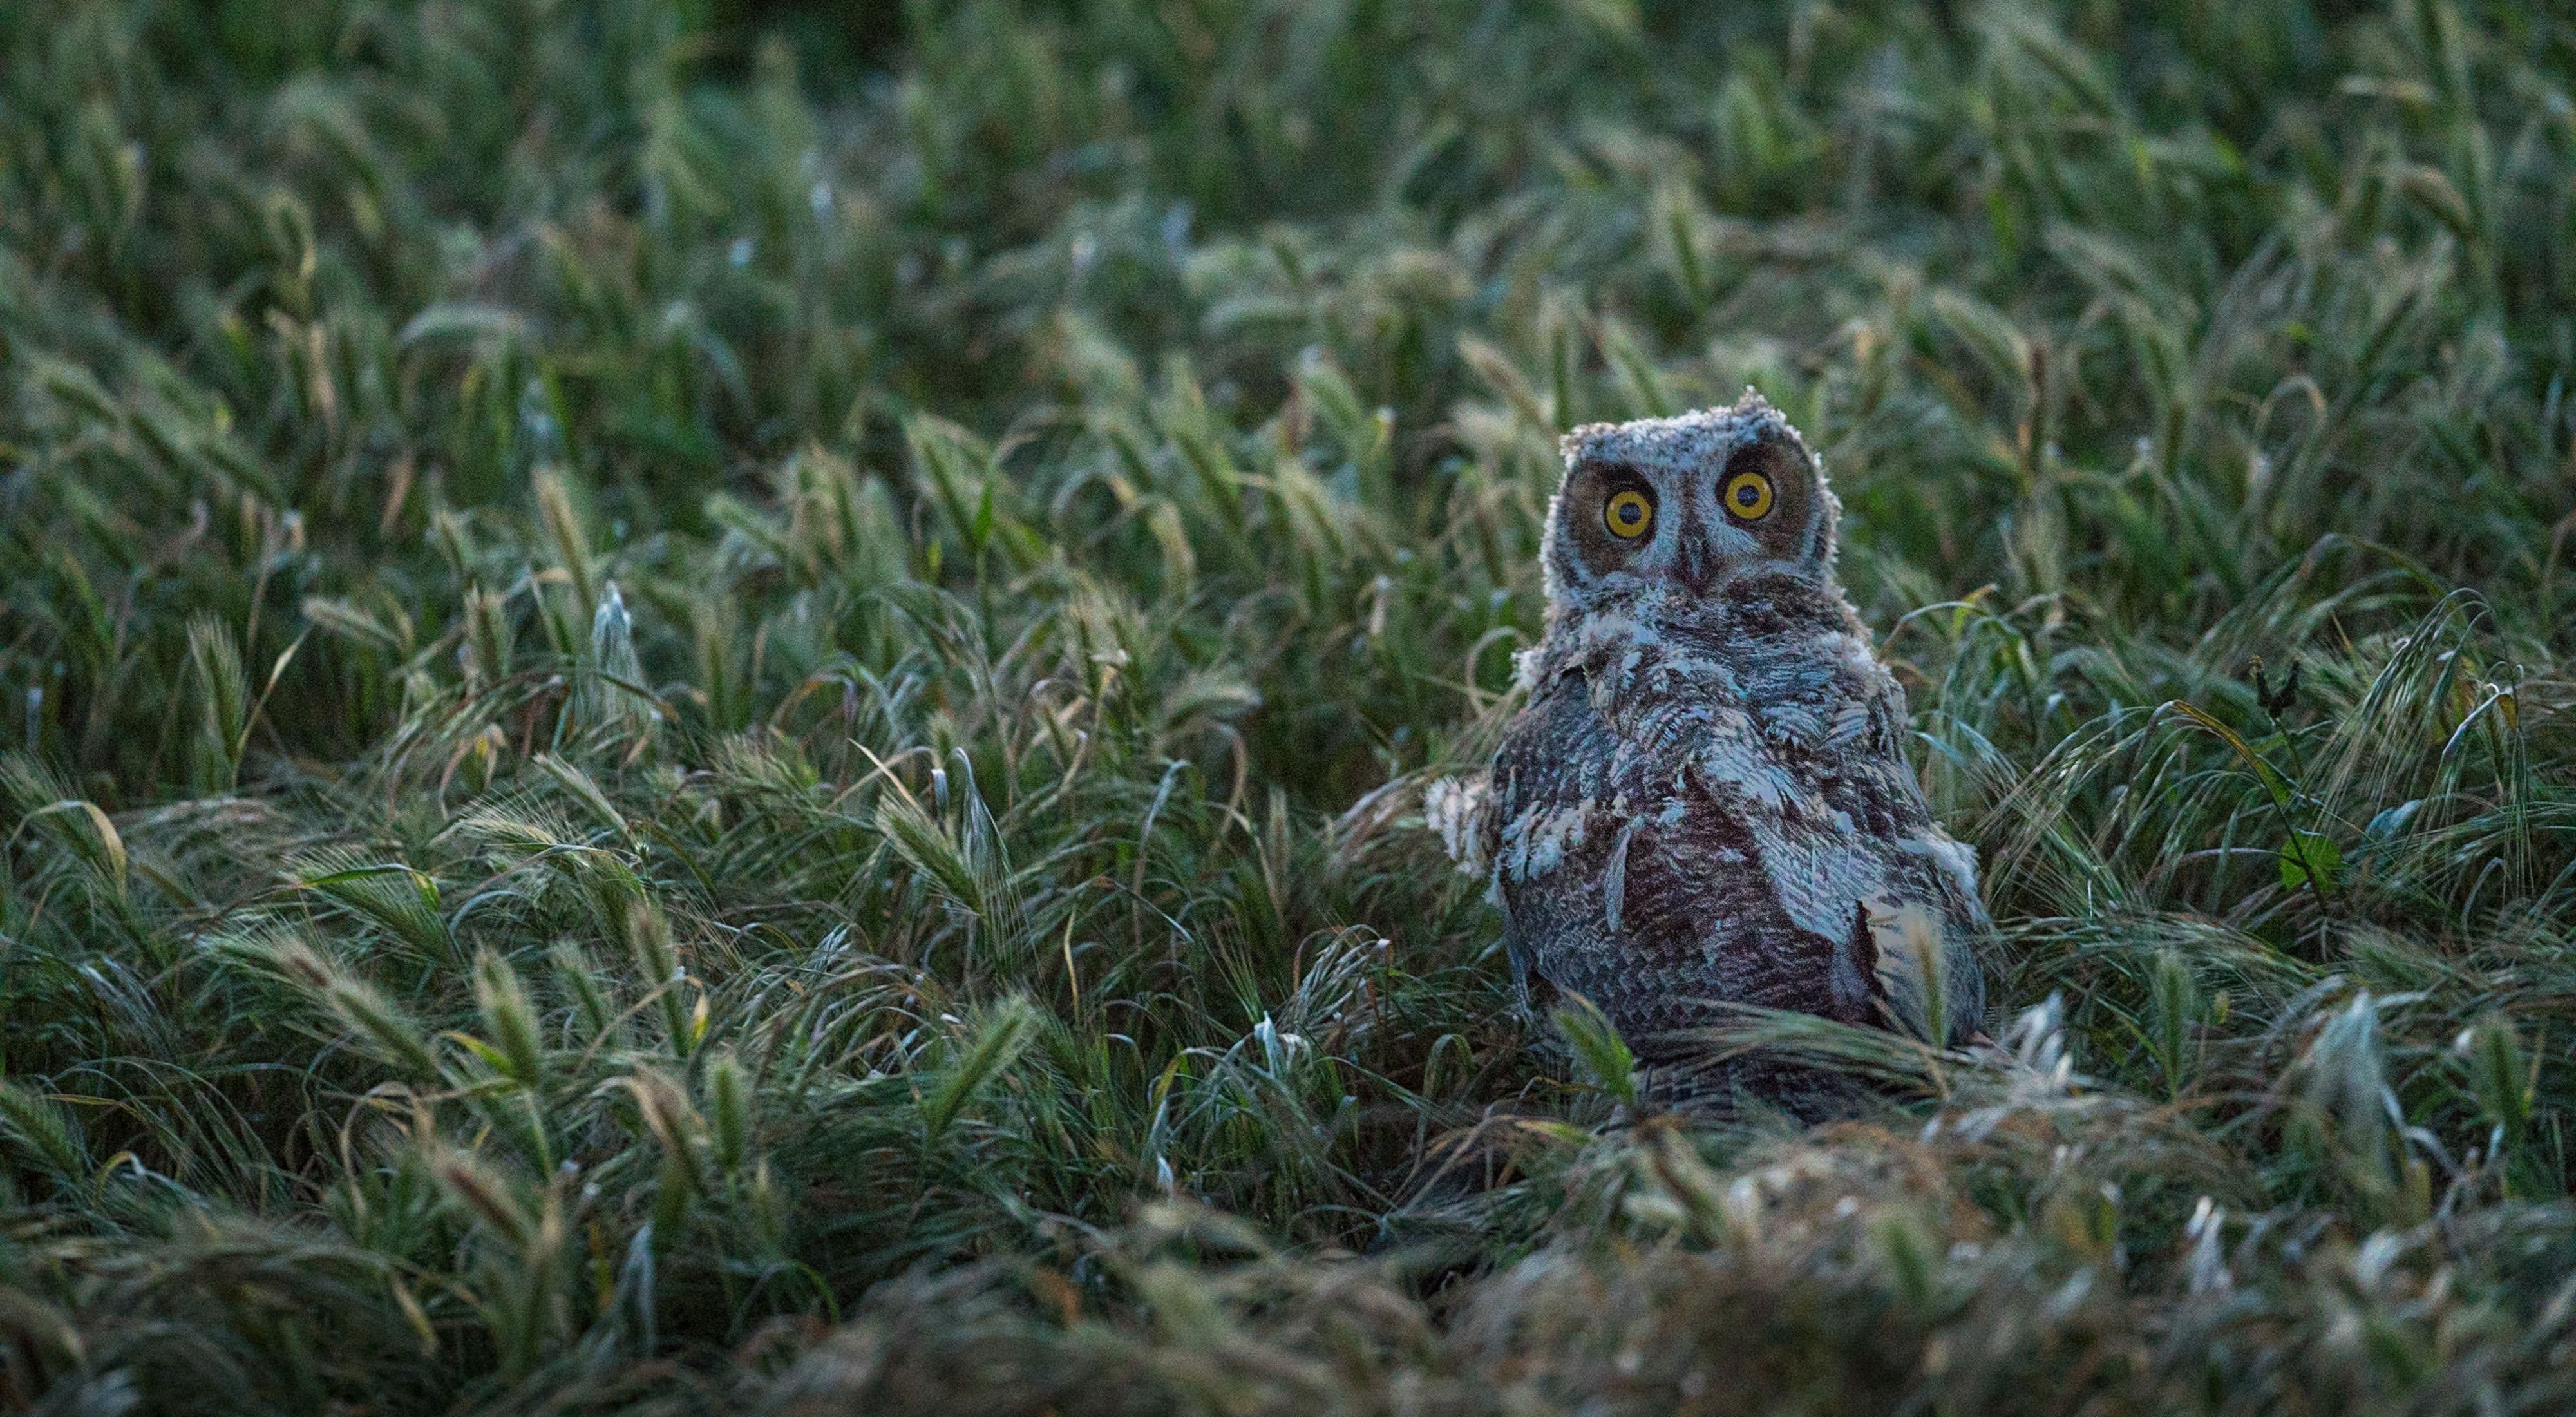 A great horned owl peeking out from the grass.